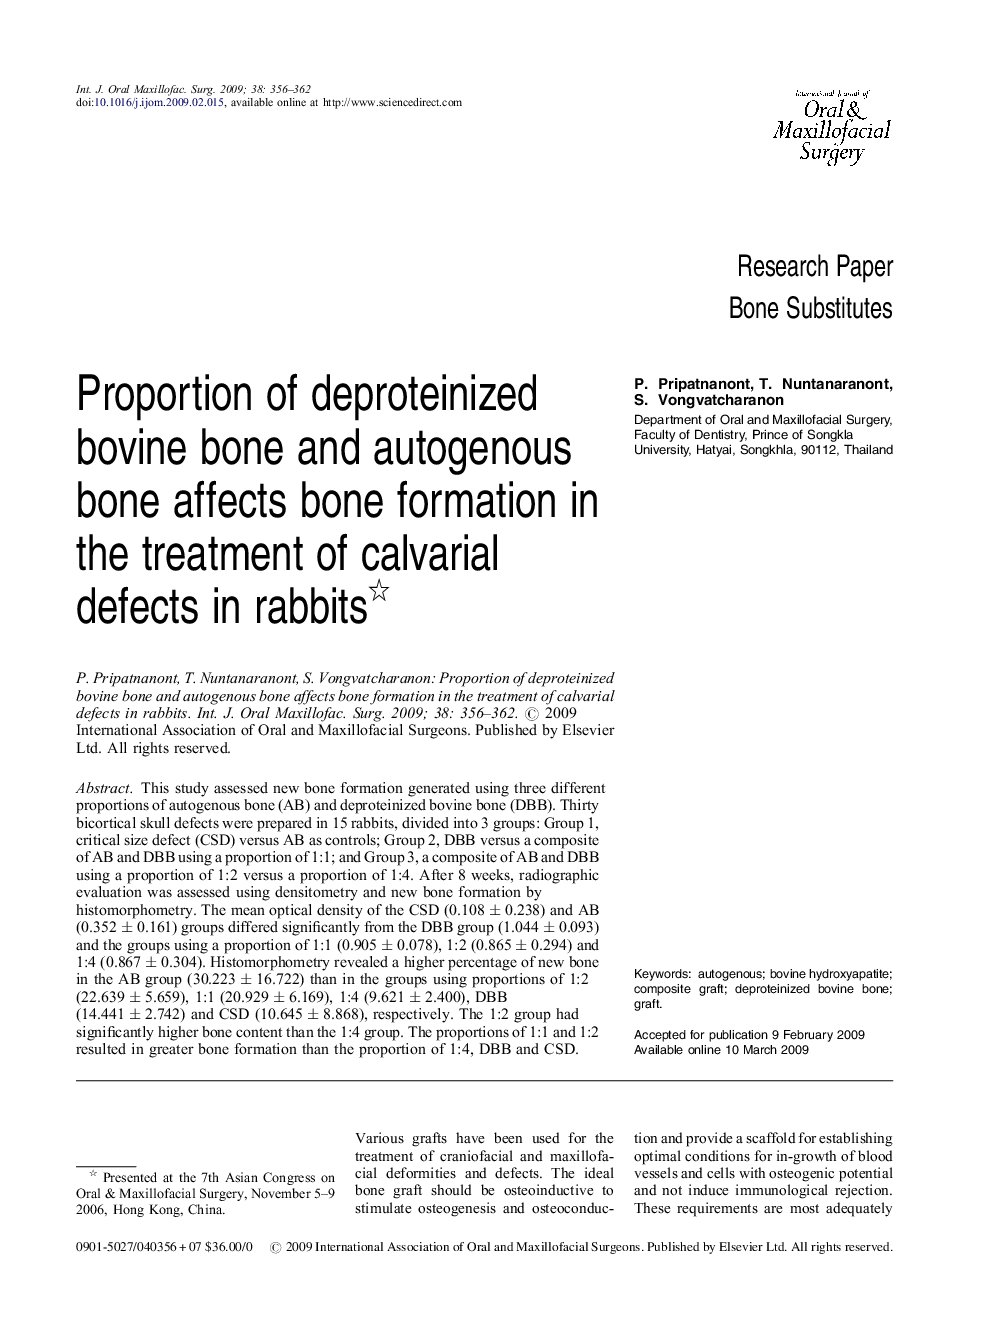 Proportion of deproteinized bovine bone and autogenous bone affects bone formation in the treatment of calvarial defects in rabbits 